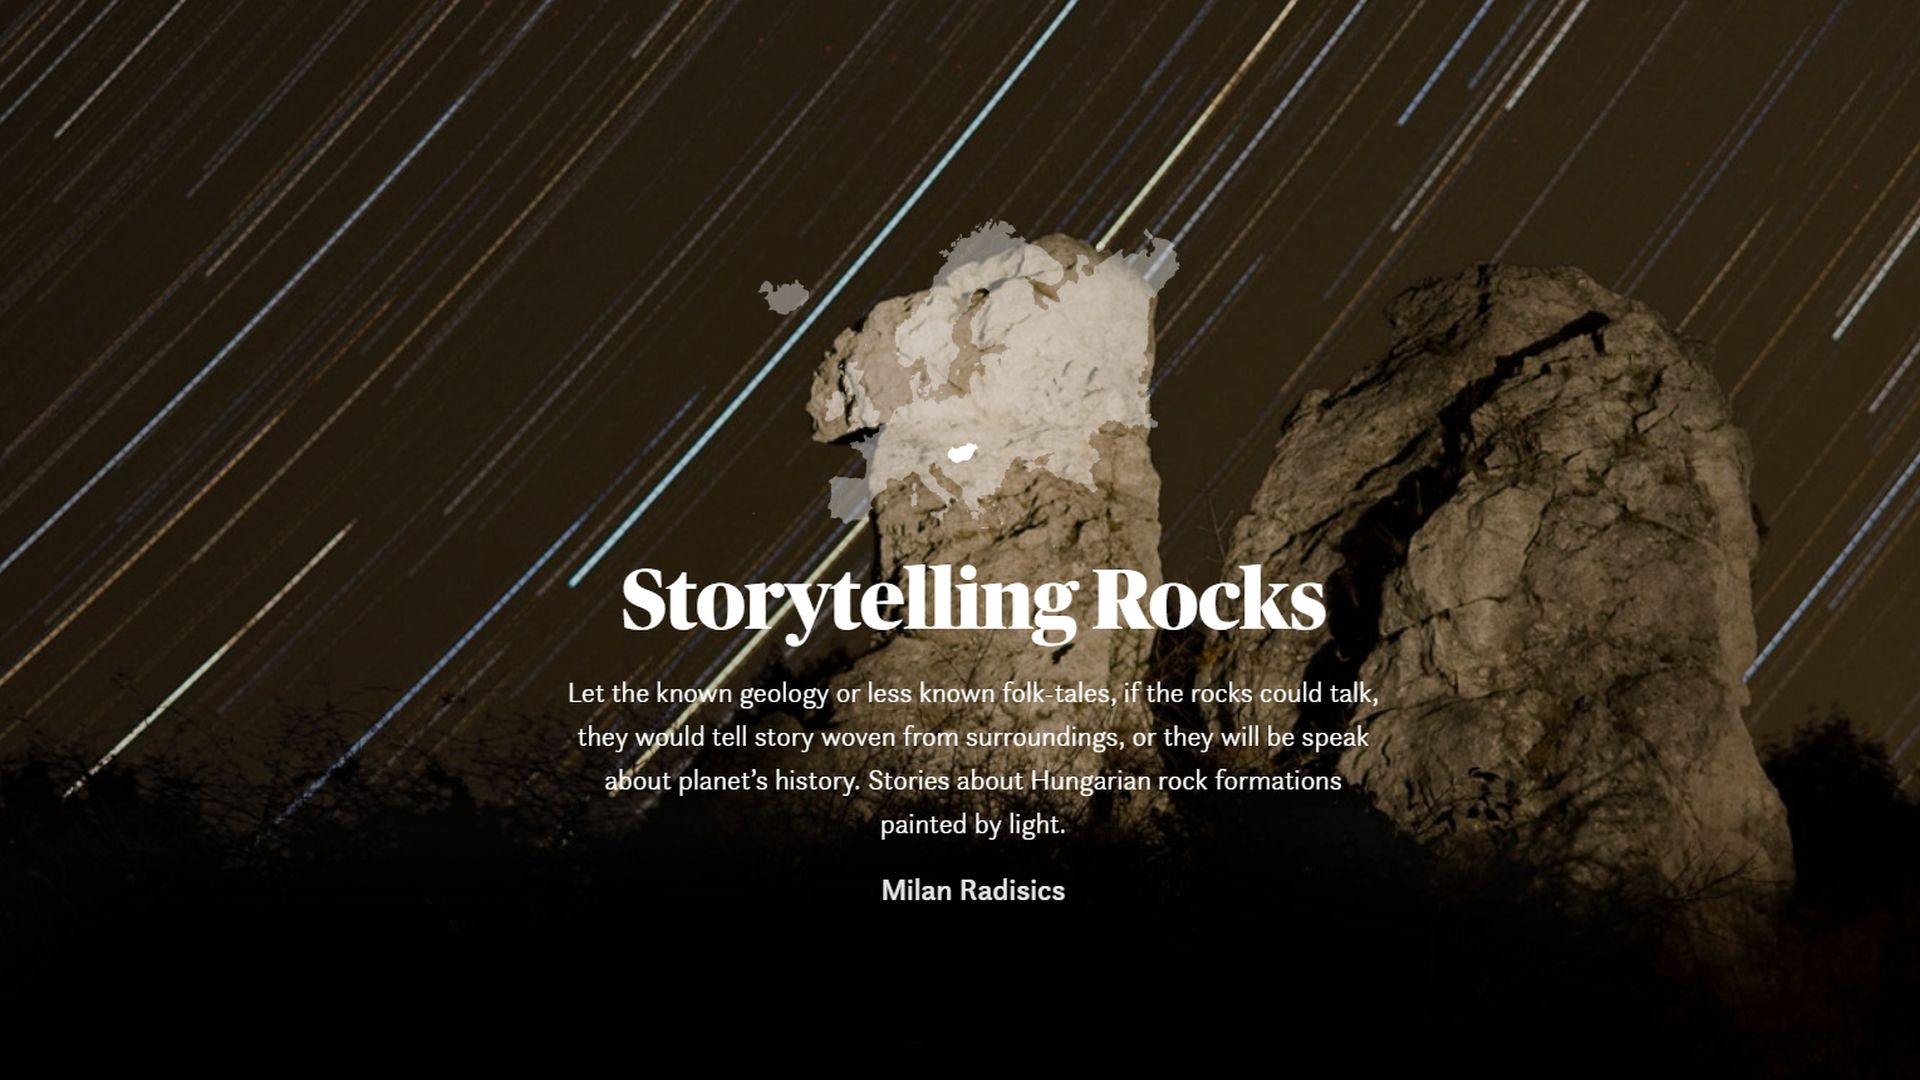 Maptia: Storytelling RocksLet the known geology or less known folk-tales, if the rocks could talk, they would tell story woven from surroundings, or they will be speak about planet’s history. Stories about Hungarian rock formations painted by light